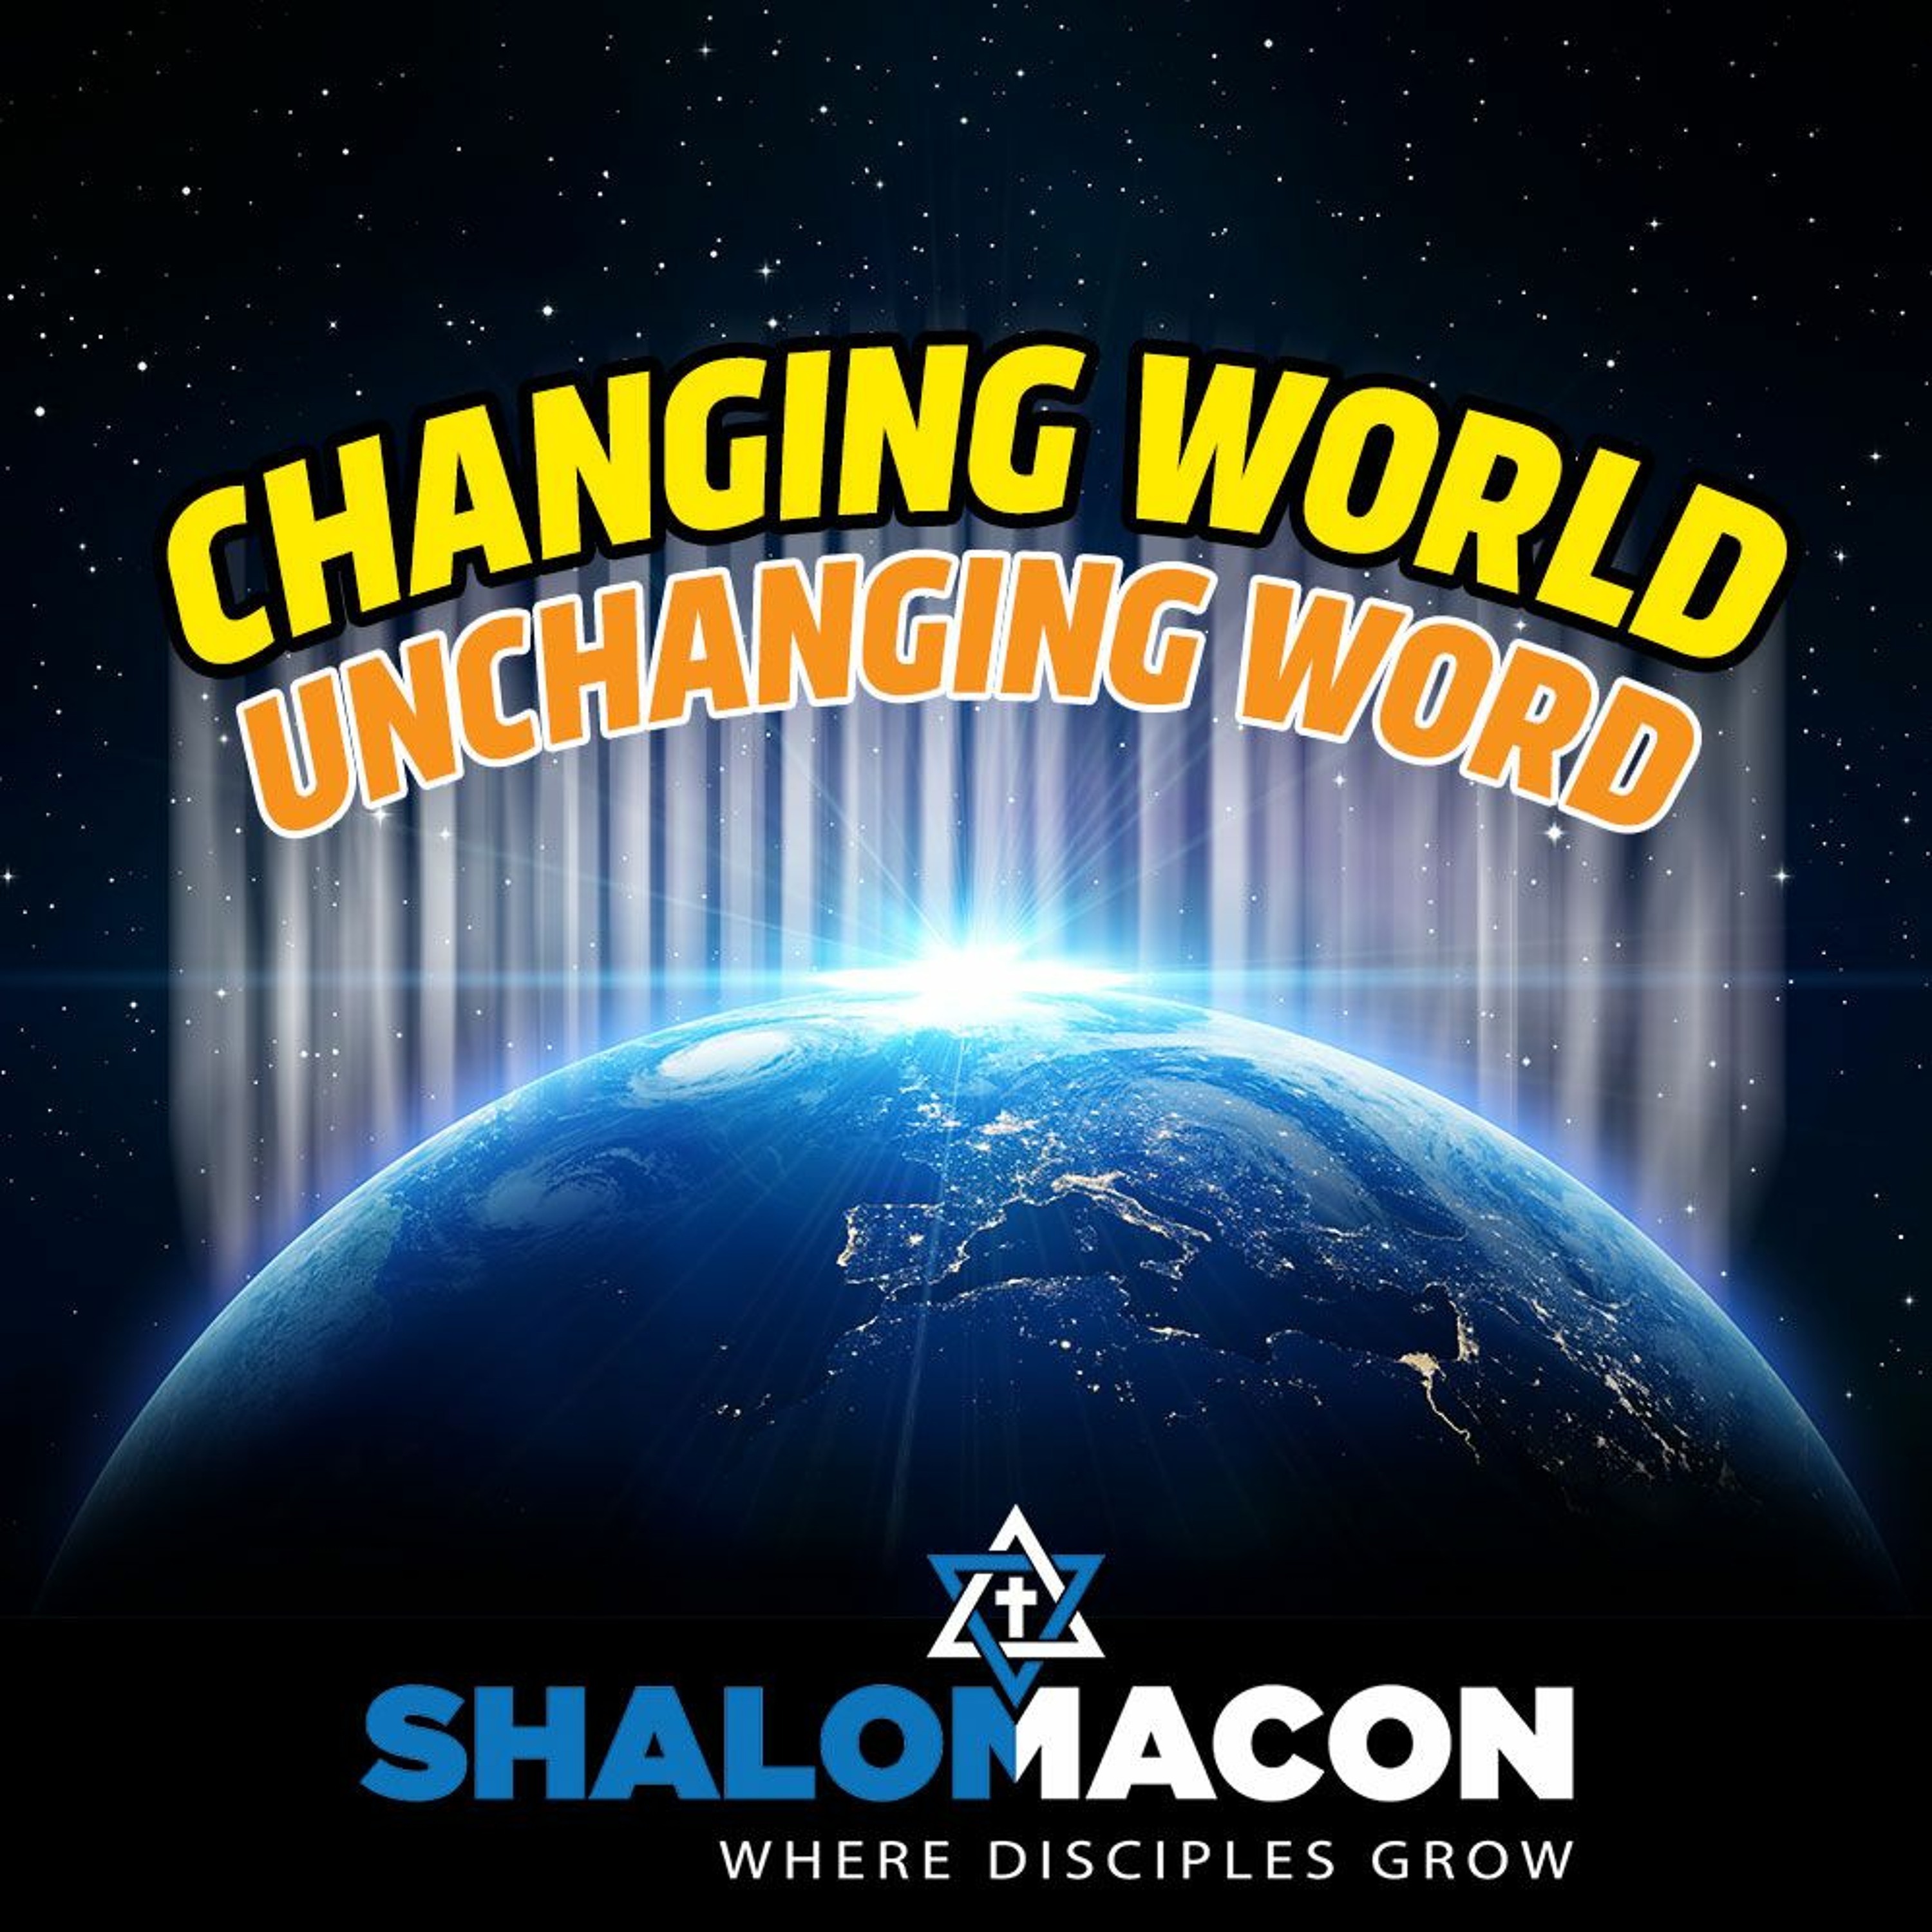 Changing World, Unchanging Word